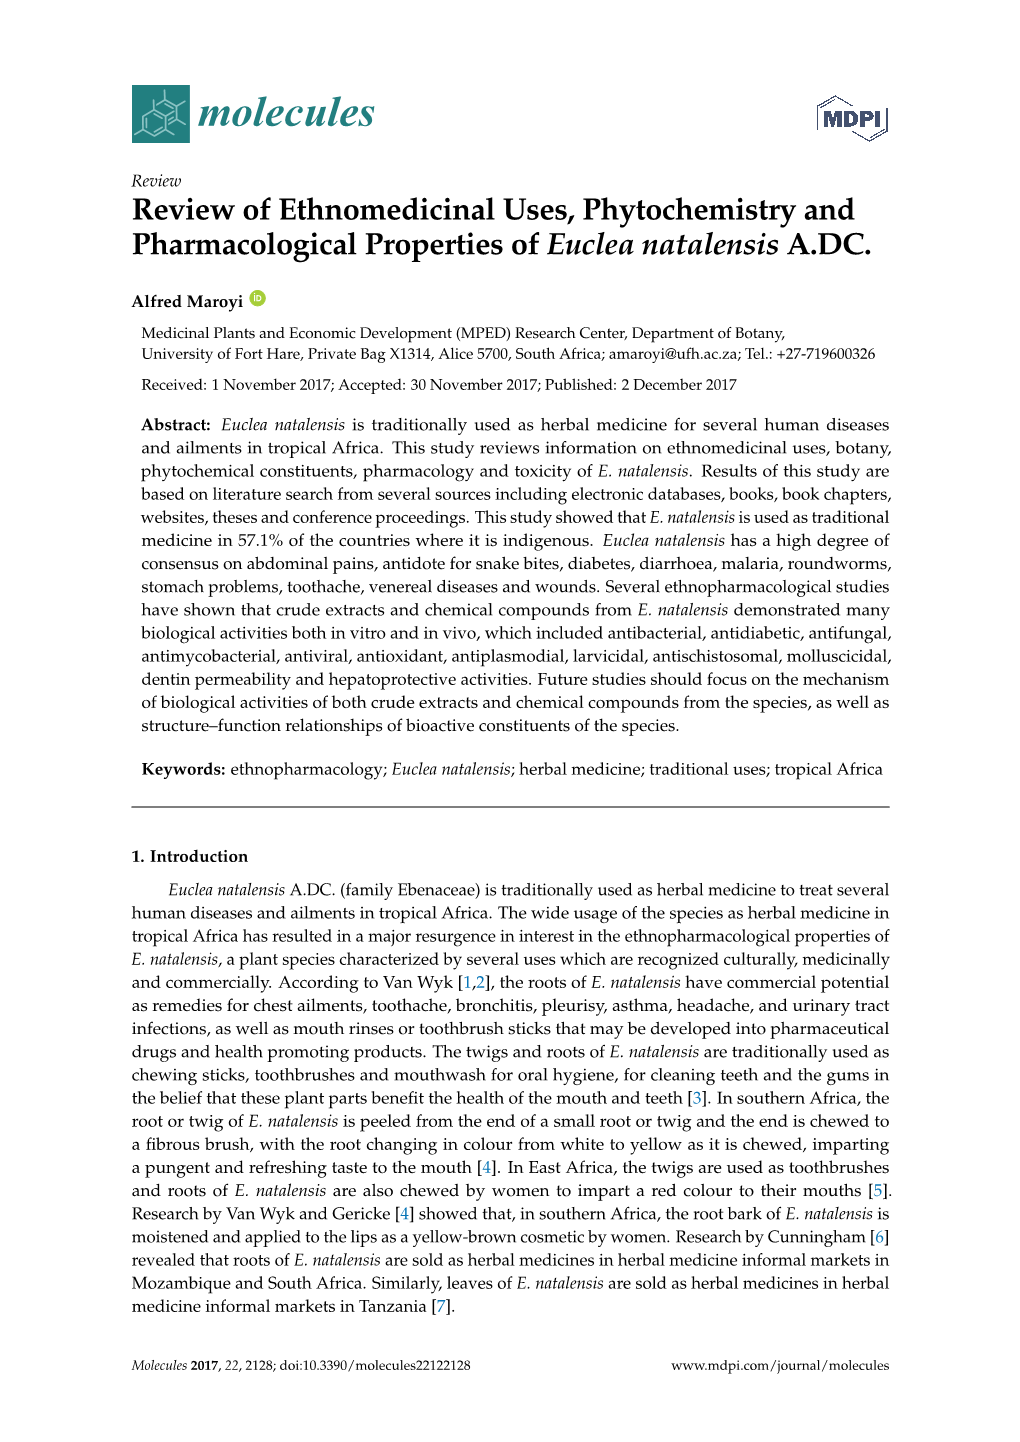 Review of Ethnomedicinal Uses, Phytochemistry and Pharmacological Properties of Euclea Natalensis A.DC